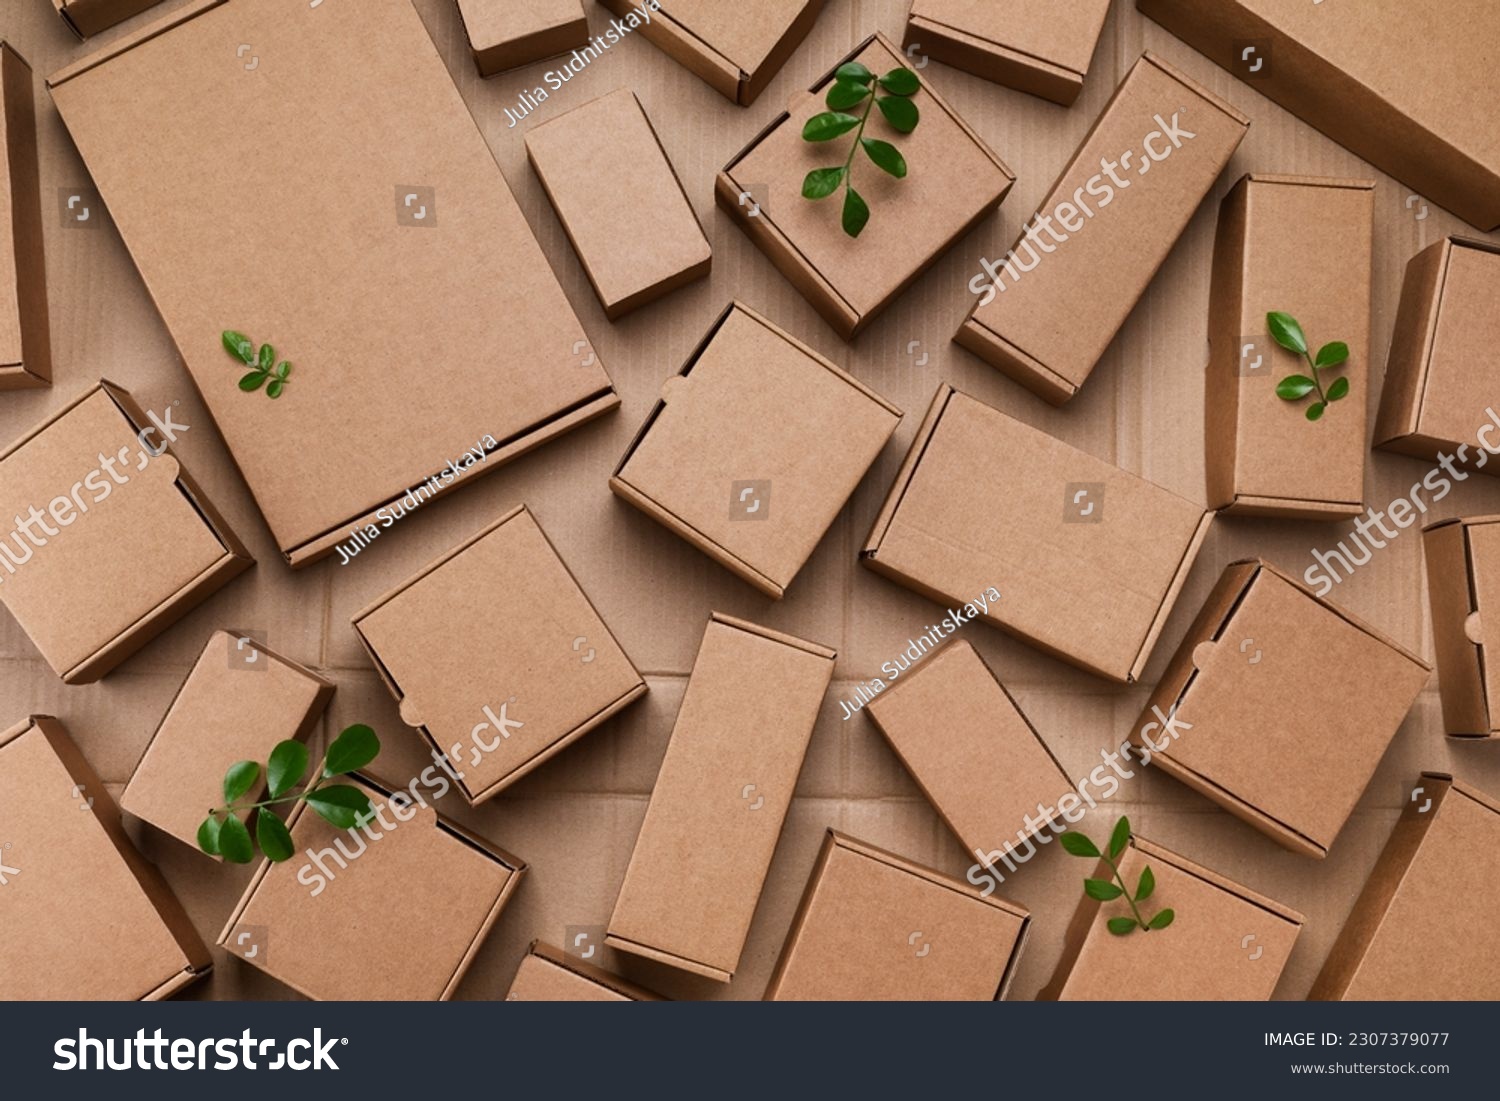 Heap of cardboard boxes from natural recyclable materials with green leaves sprout top view. Responsible consumption, eco friendly packaging, zero waste concept. #2307379077